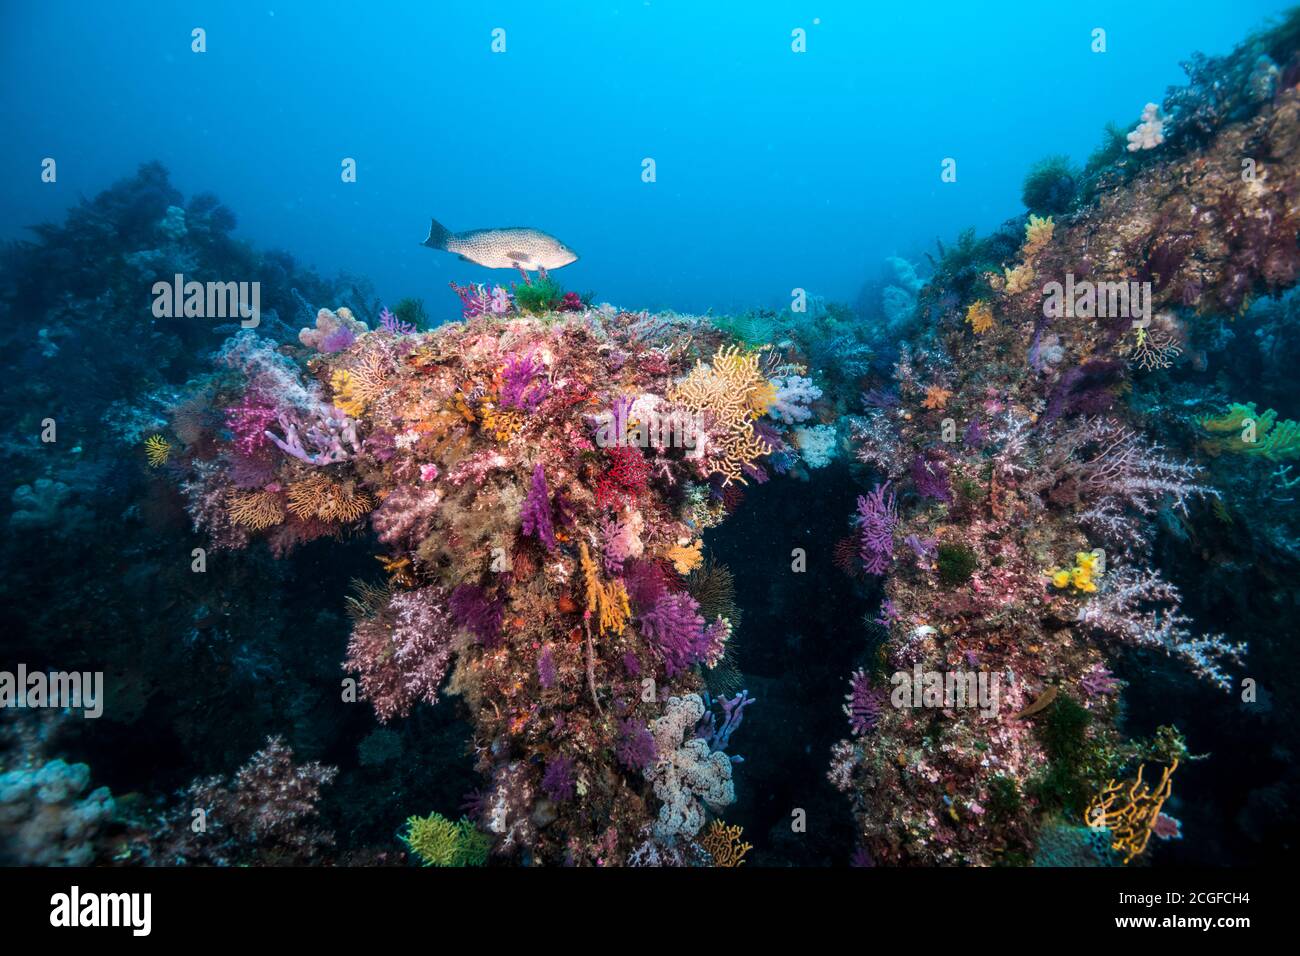 A lot of colorful soft corals cover the artificial fish reef against the background of the blue water. with a fish Stock Photo